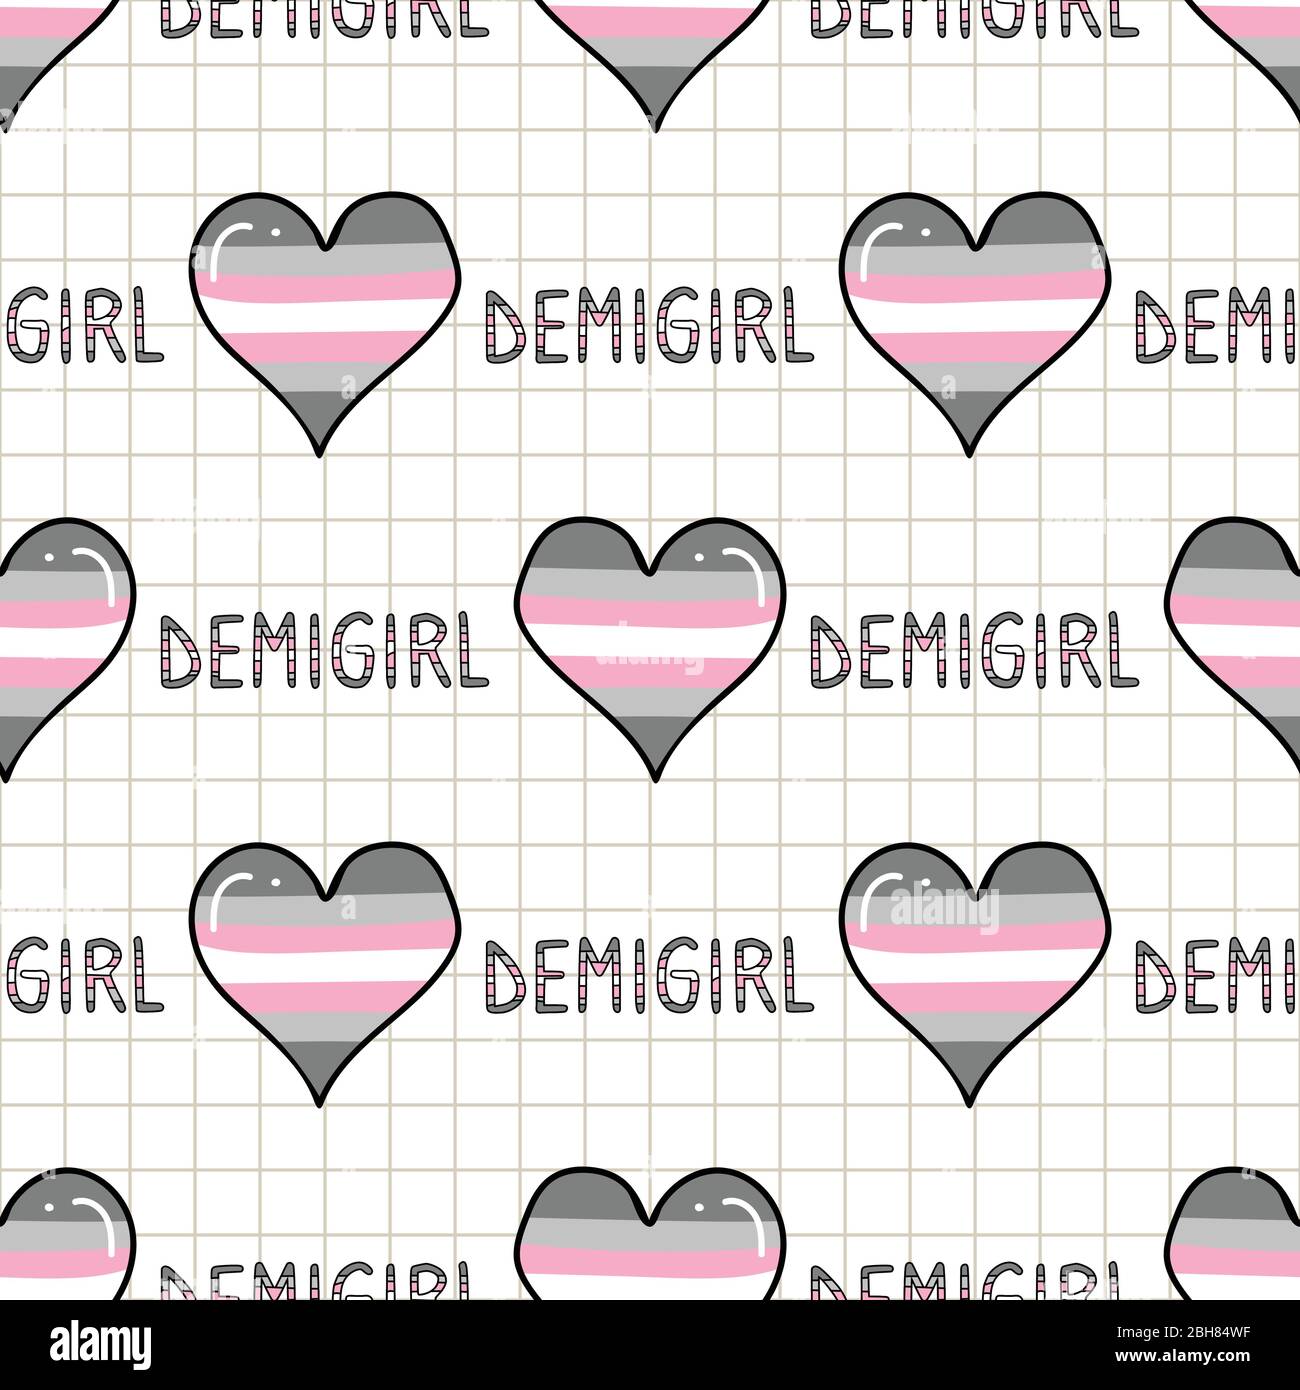 Demigirl LGBTQ flag wallpaper by PIPE4dbus  Download on ZEDGE  d6c7